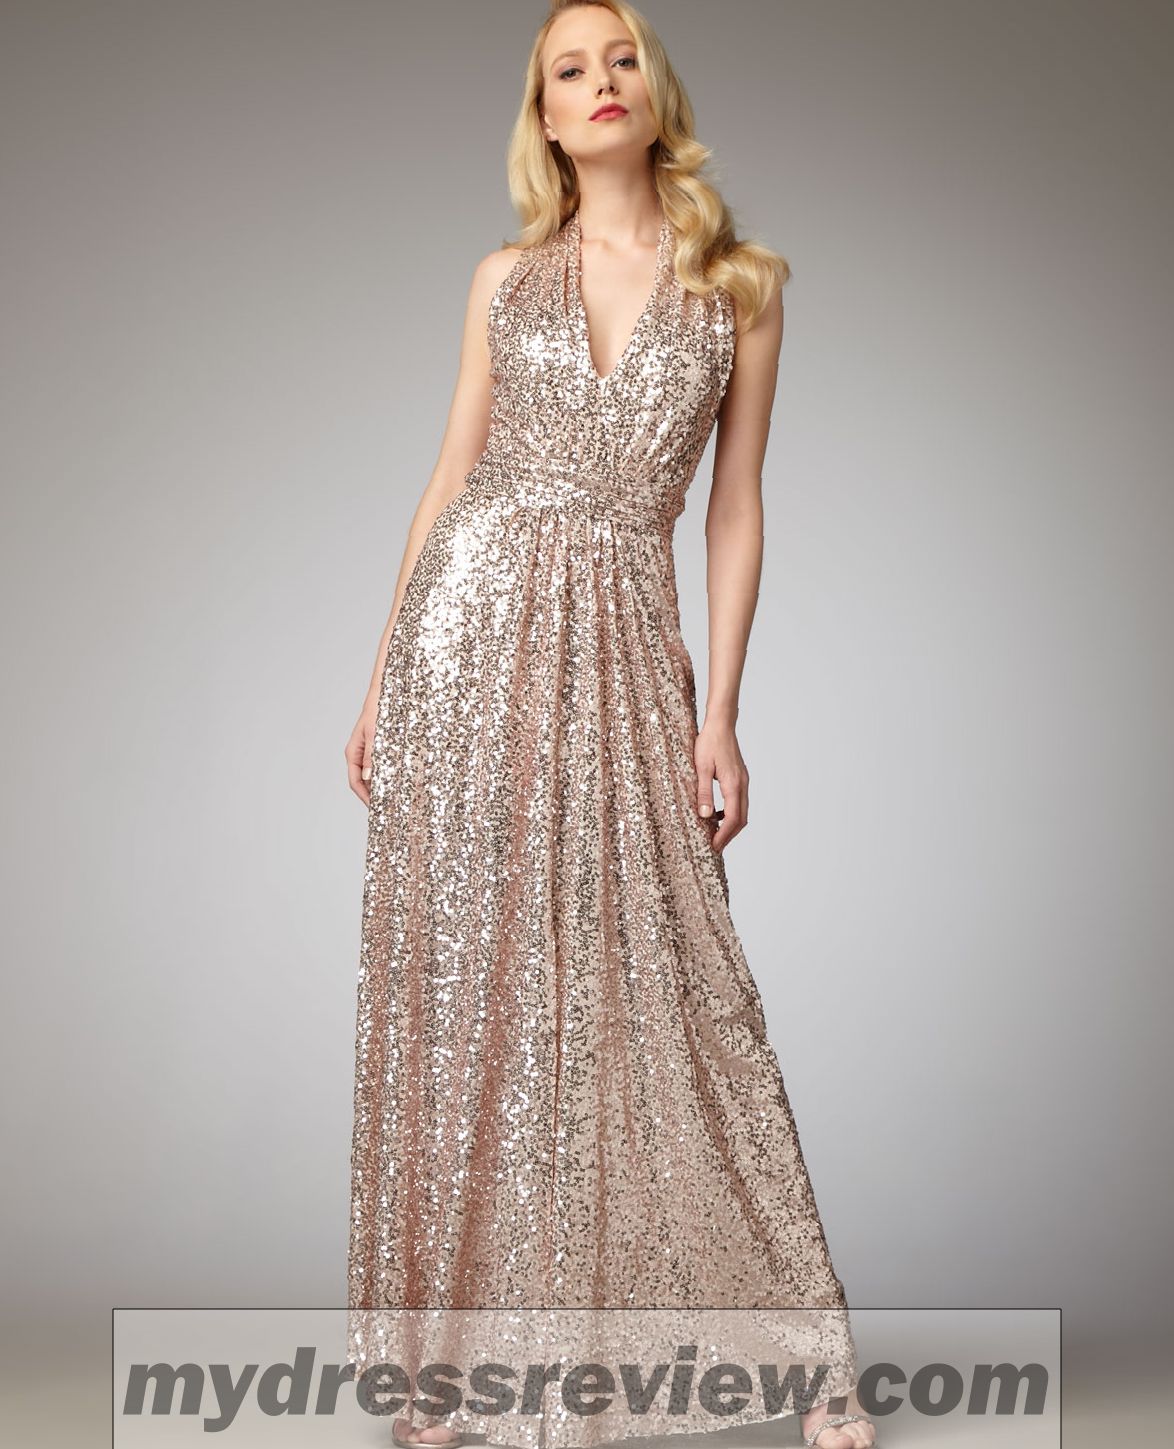 Halter Neck Gold Sequin Dress - Be Beautiful And Chic